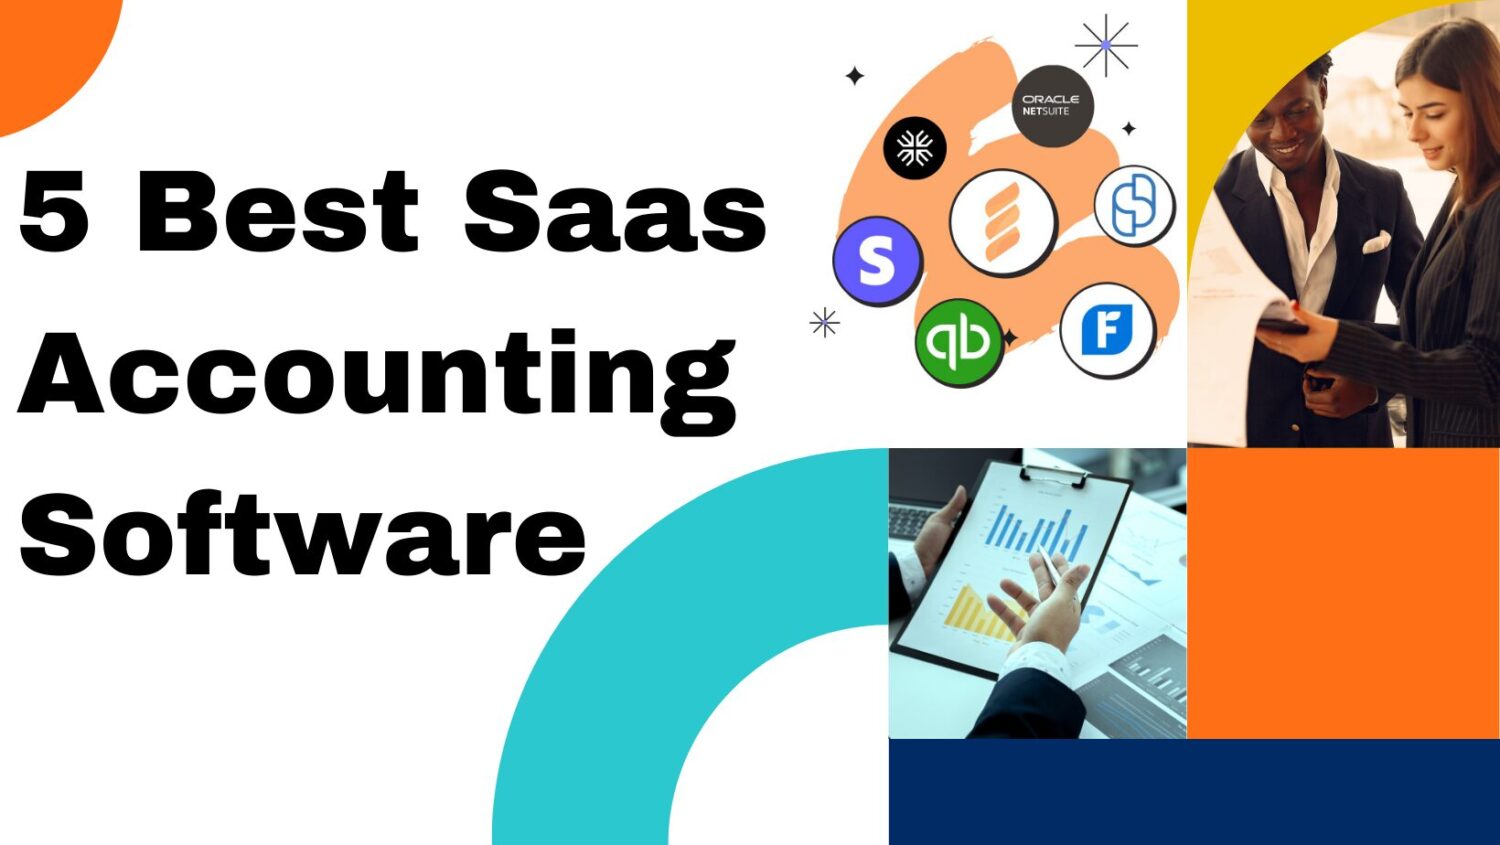 5 Best Saas Accounting Software